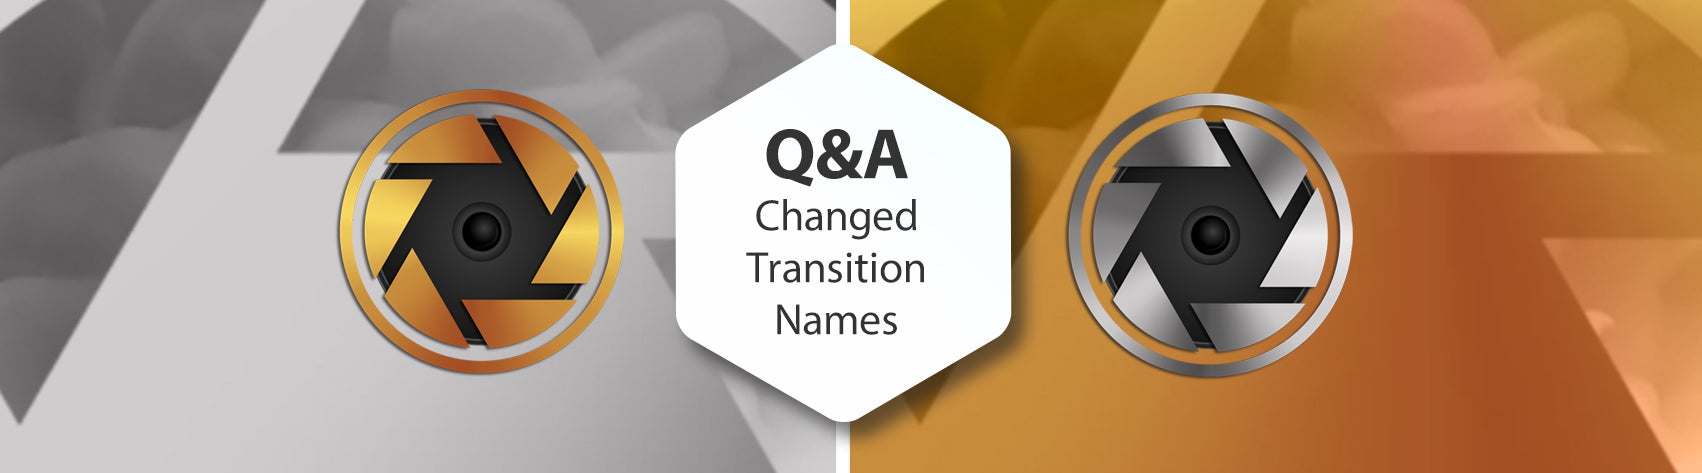 Q&A Changed Transition Names